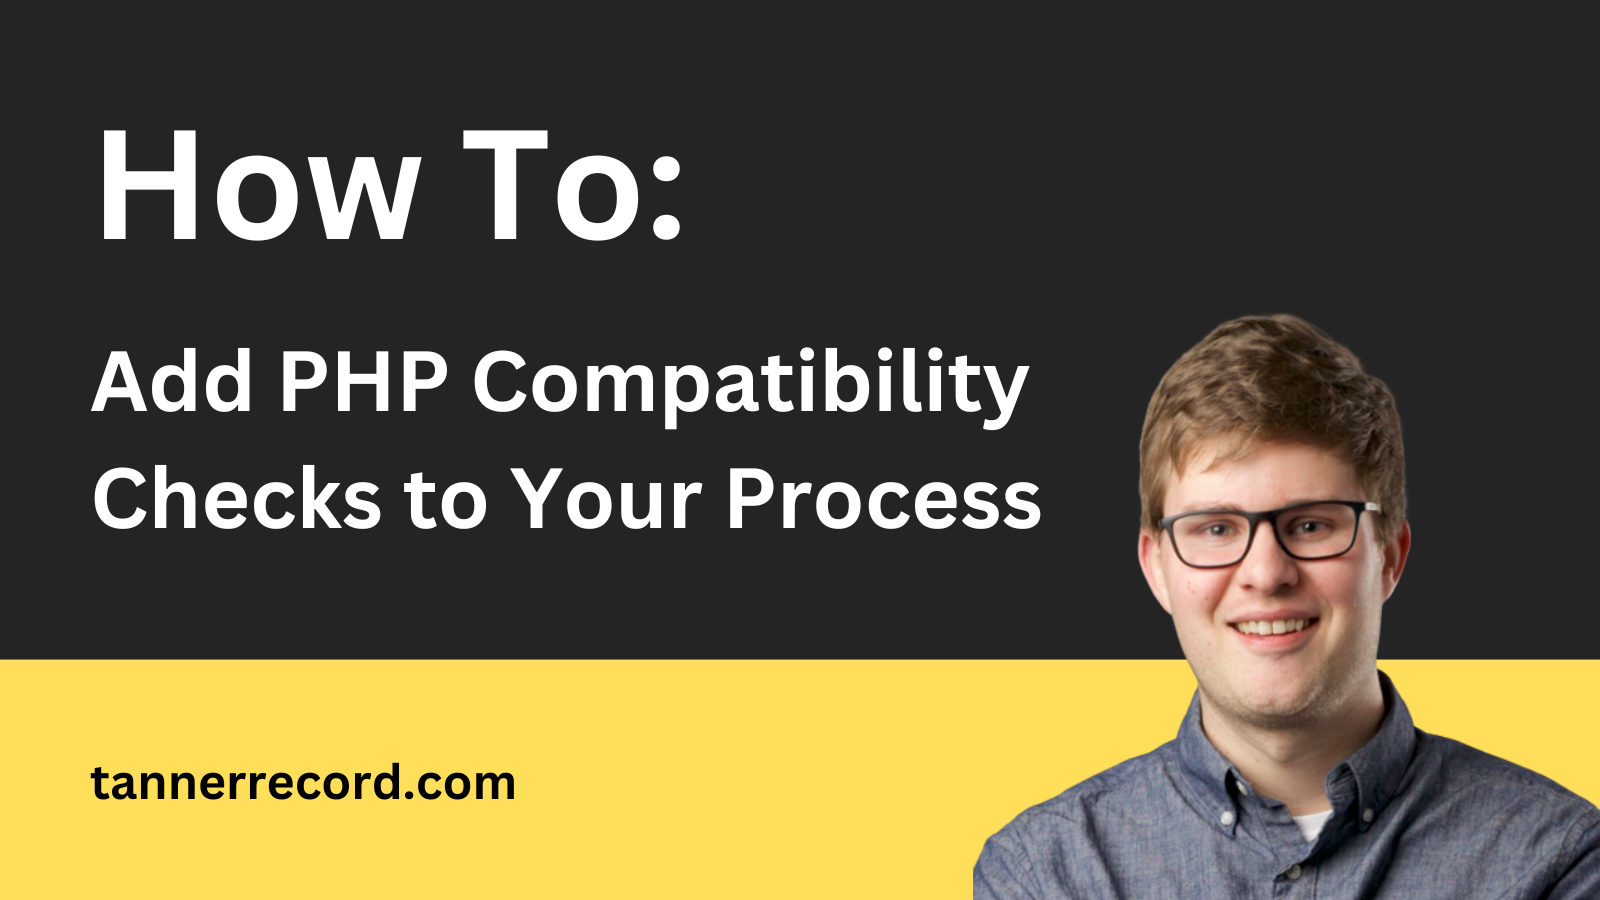 Add PHP Compatibility Checks to Your Process